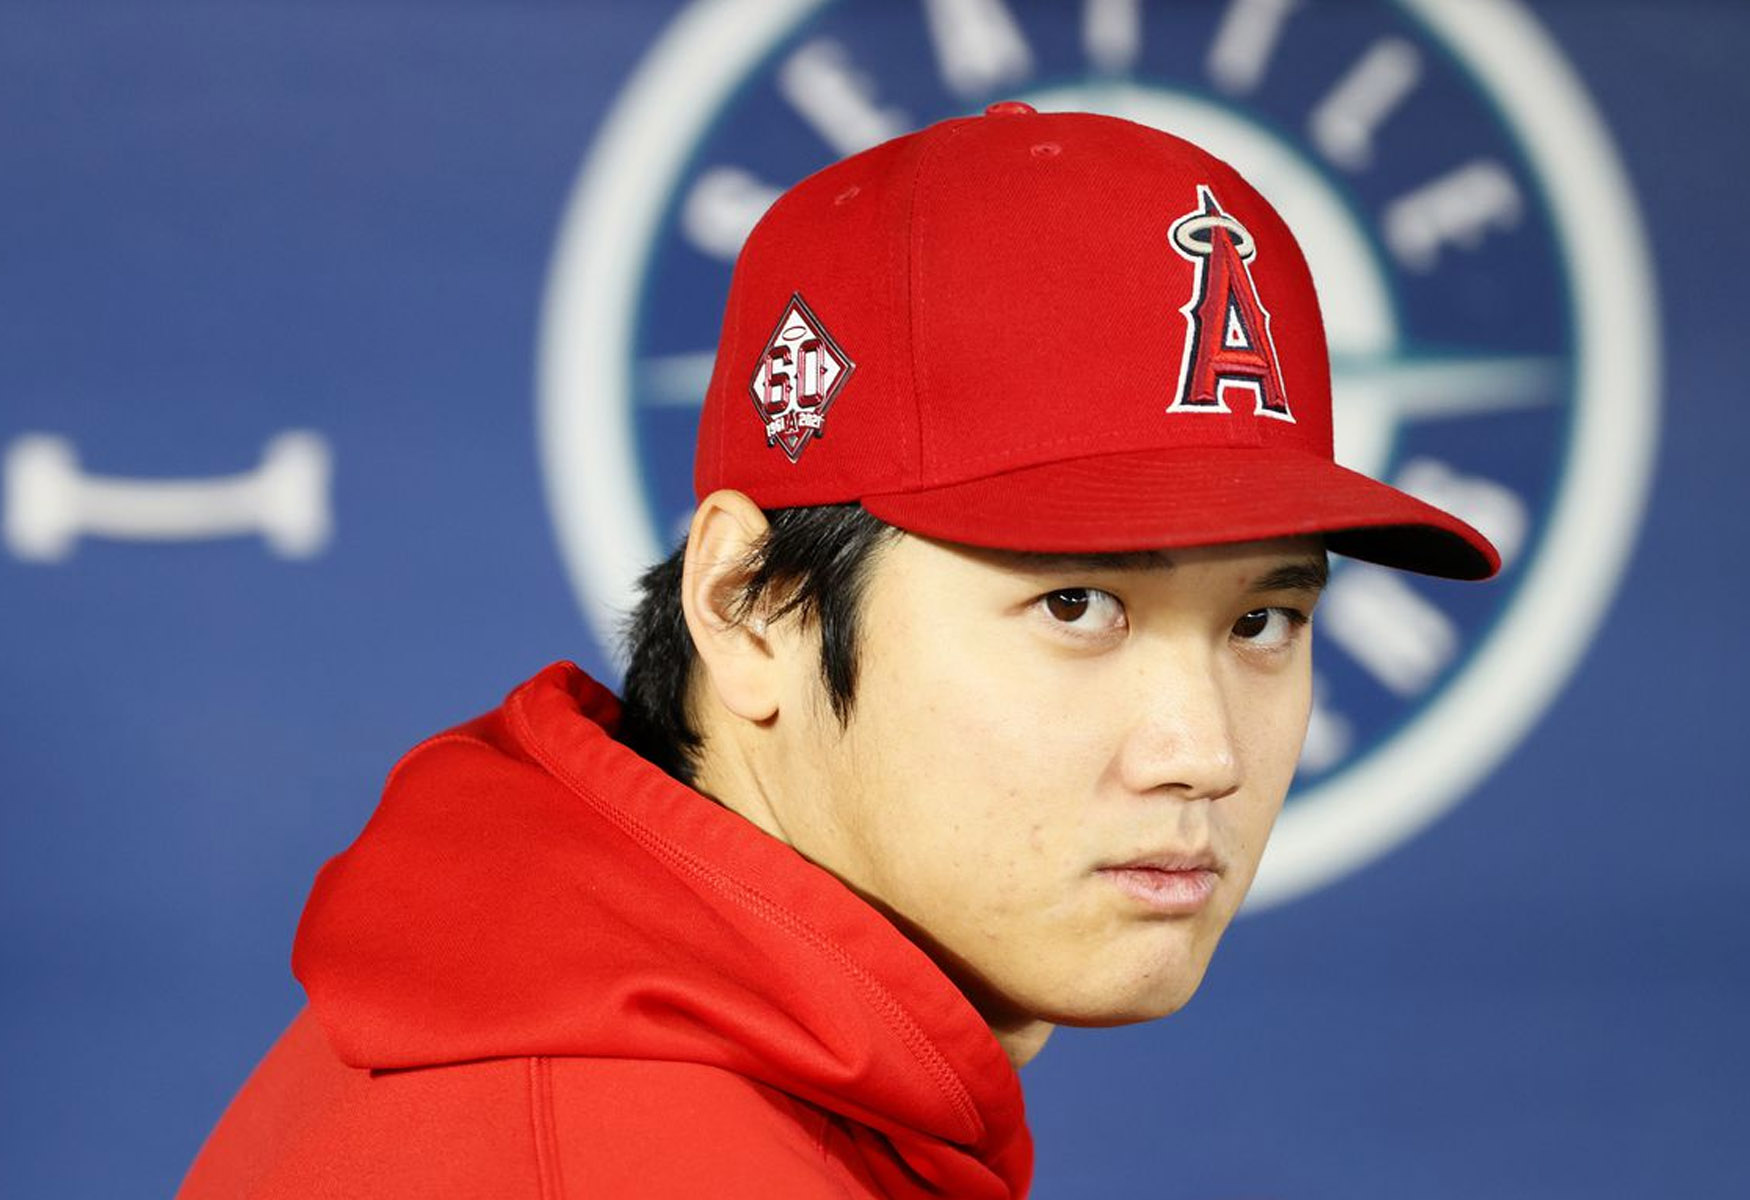 New Offer For Shohei Ohtani: Free Sandwiches And A Restaurant Name Change To Sign With Giants